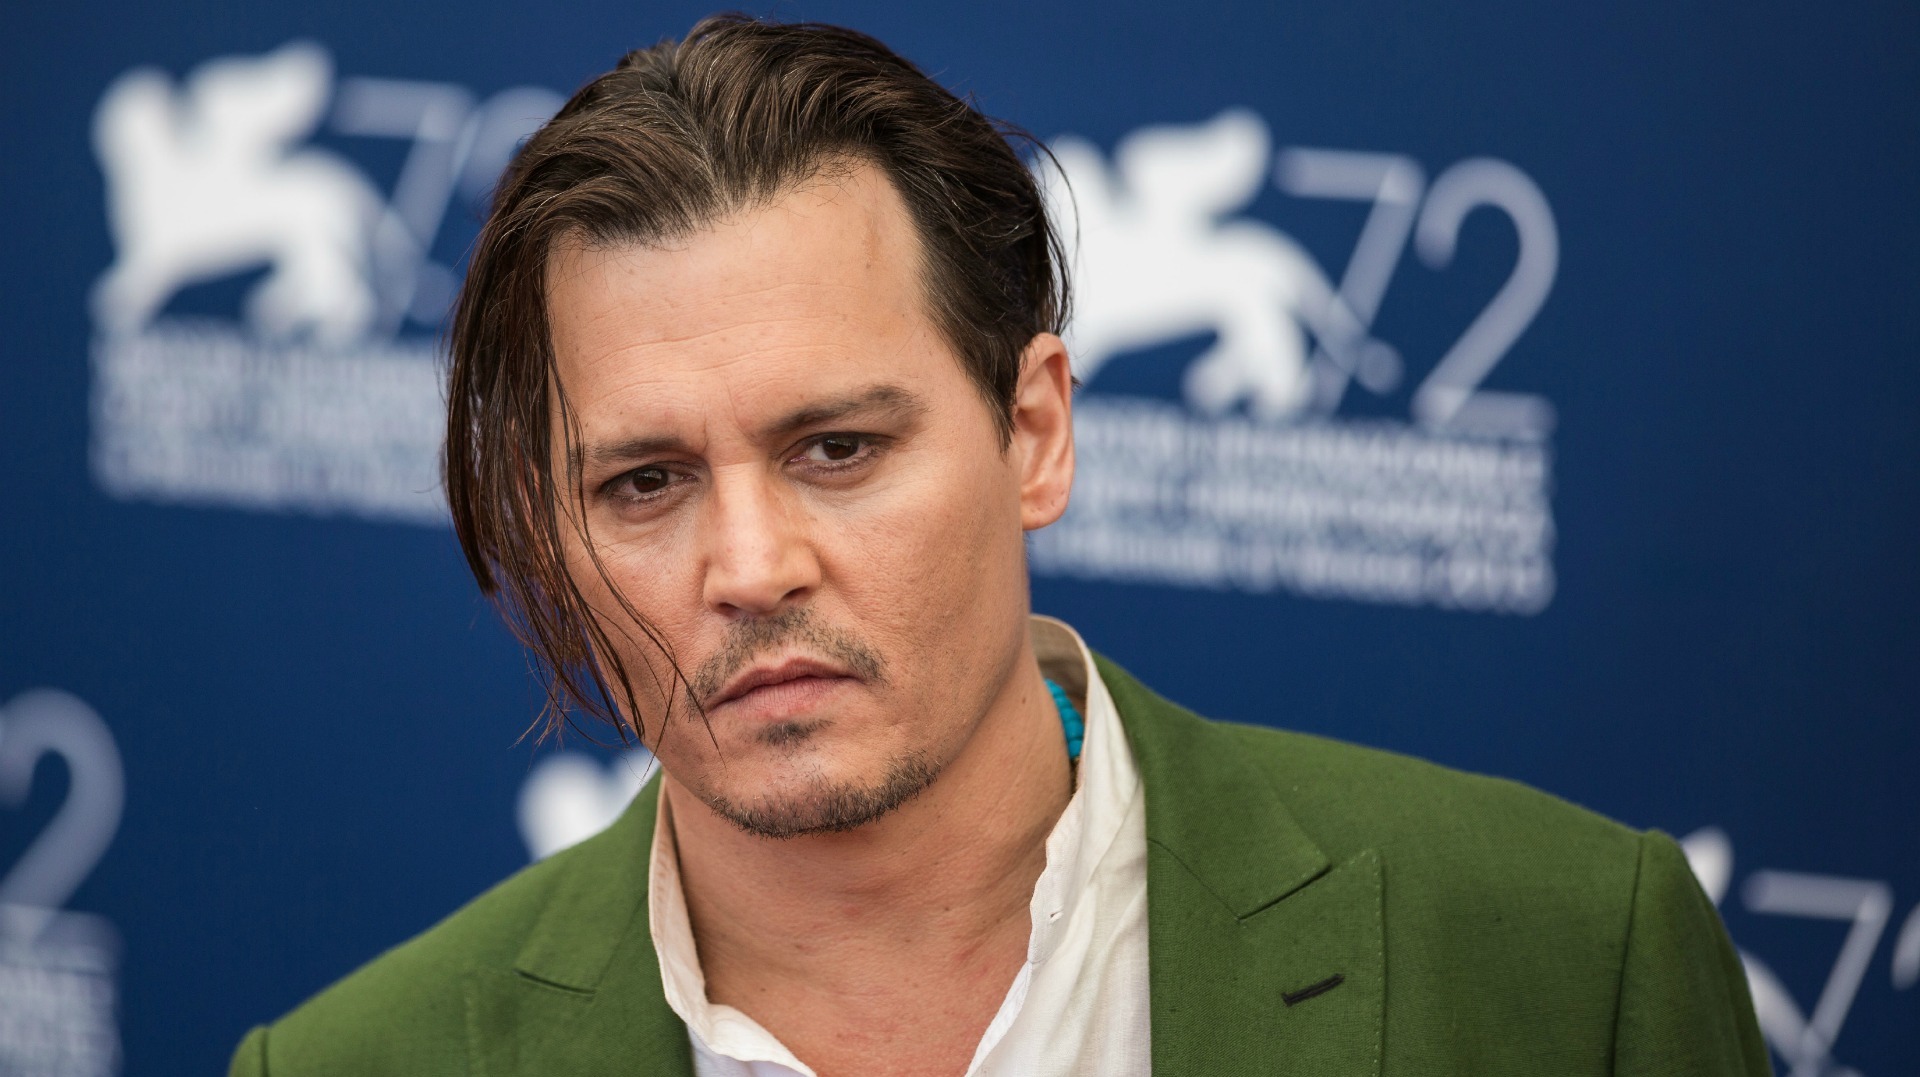 72nd Venice Film Festival - 'Black Mass' - Photocall Featuring: Johnny Depp Where: Venice, Italy When: 04 Sep 2015 Credit: WENN.com **Not available for publication in France, Netherlands, Belgium, Spain, Italy**